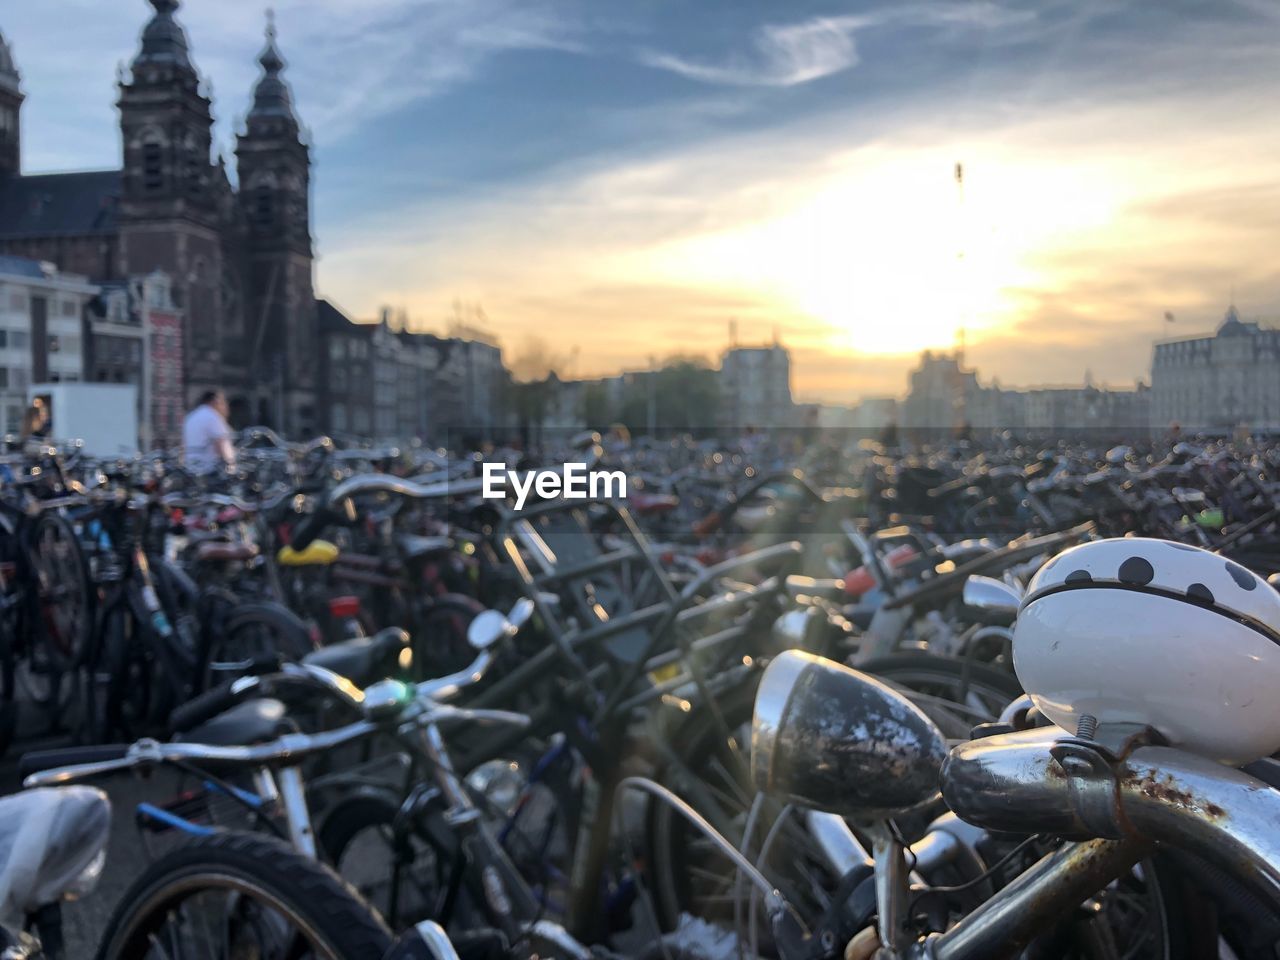 Bicycles in parking lot at city during sunset